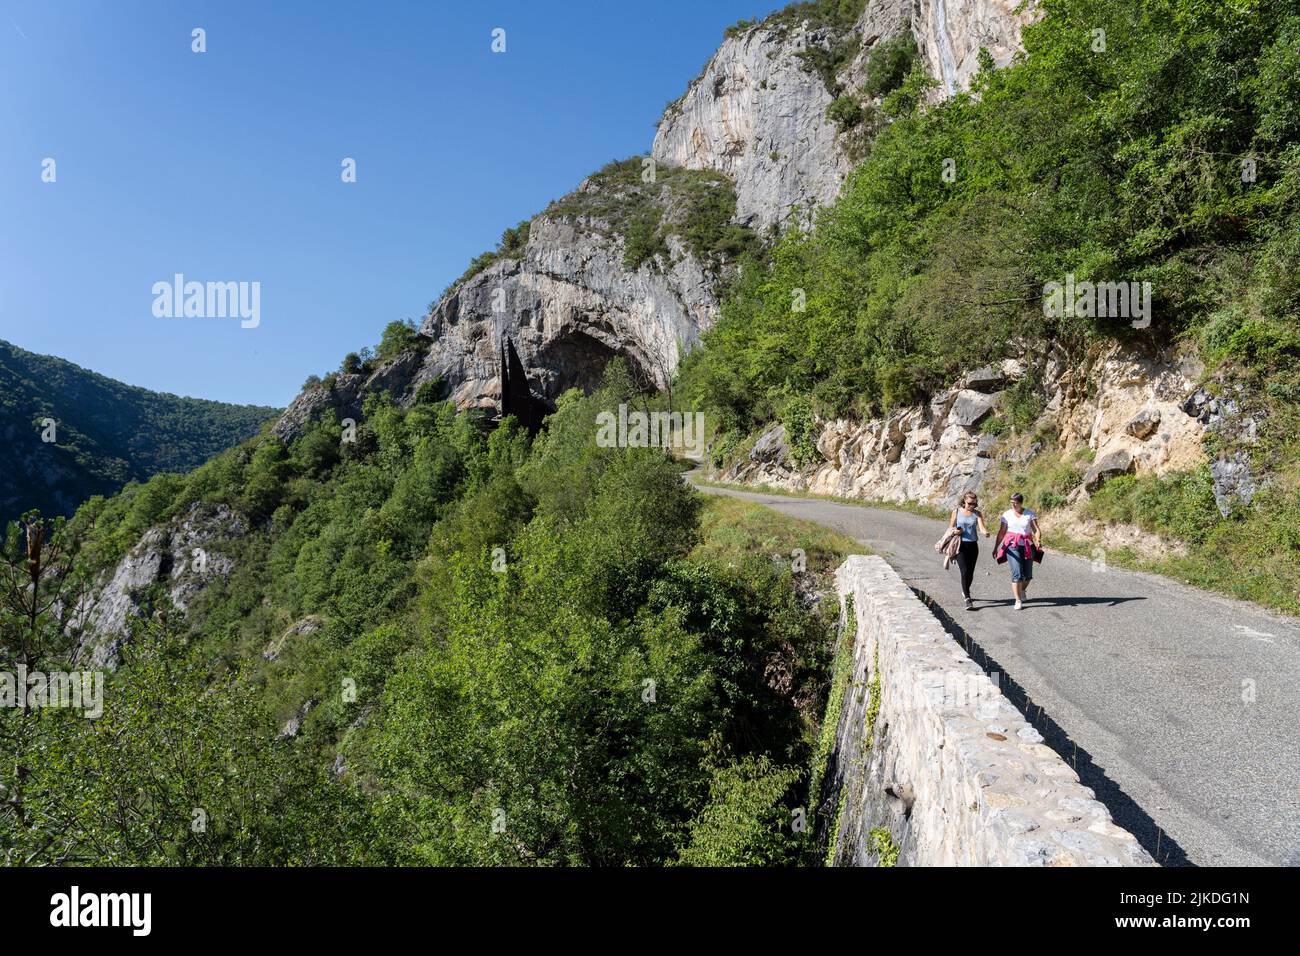 entrance of the cave of Niaux, Vicdessos valley, Niaux, department of Ariège, Pyrenean mountain range, France. Stock Photo